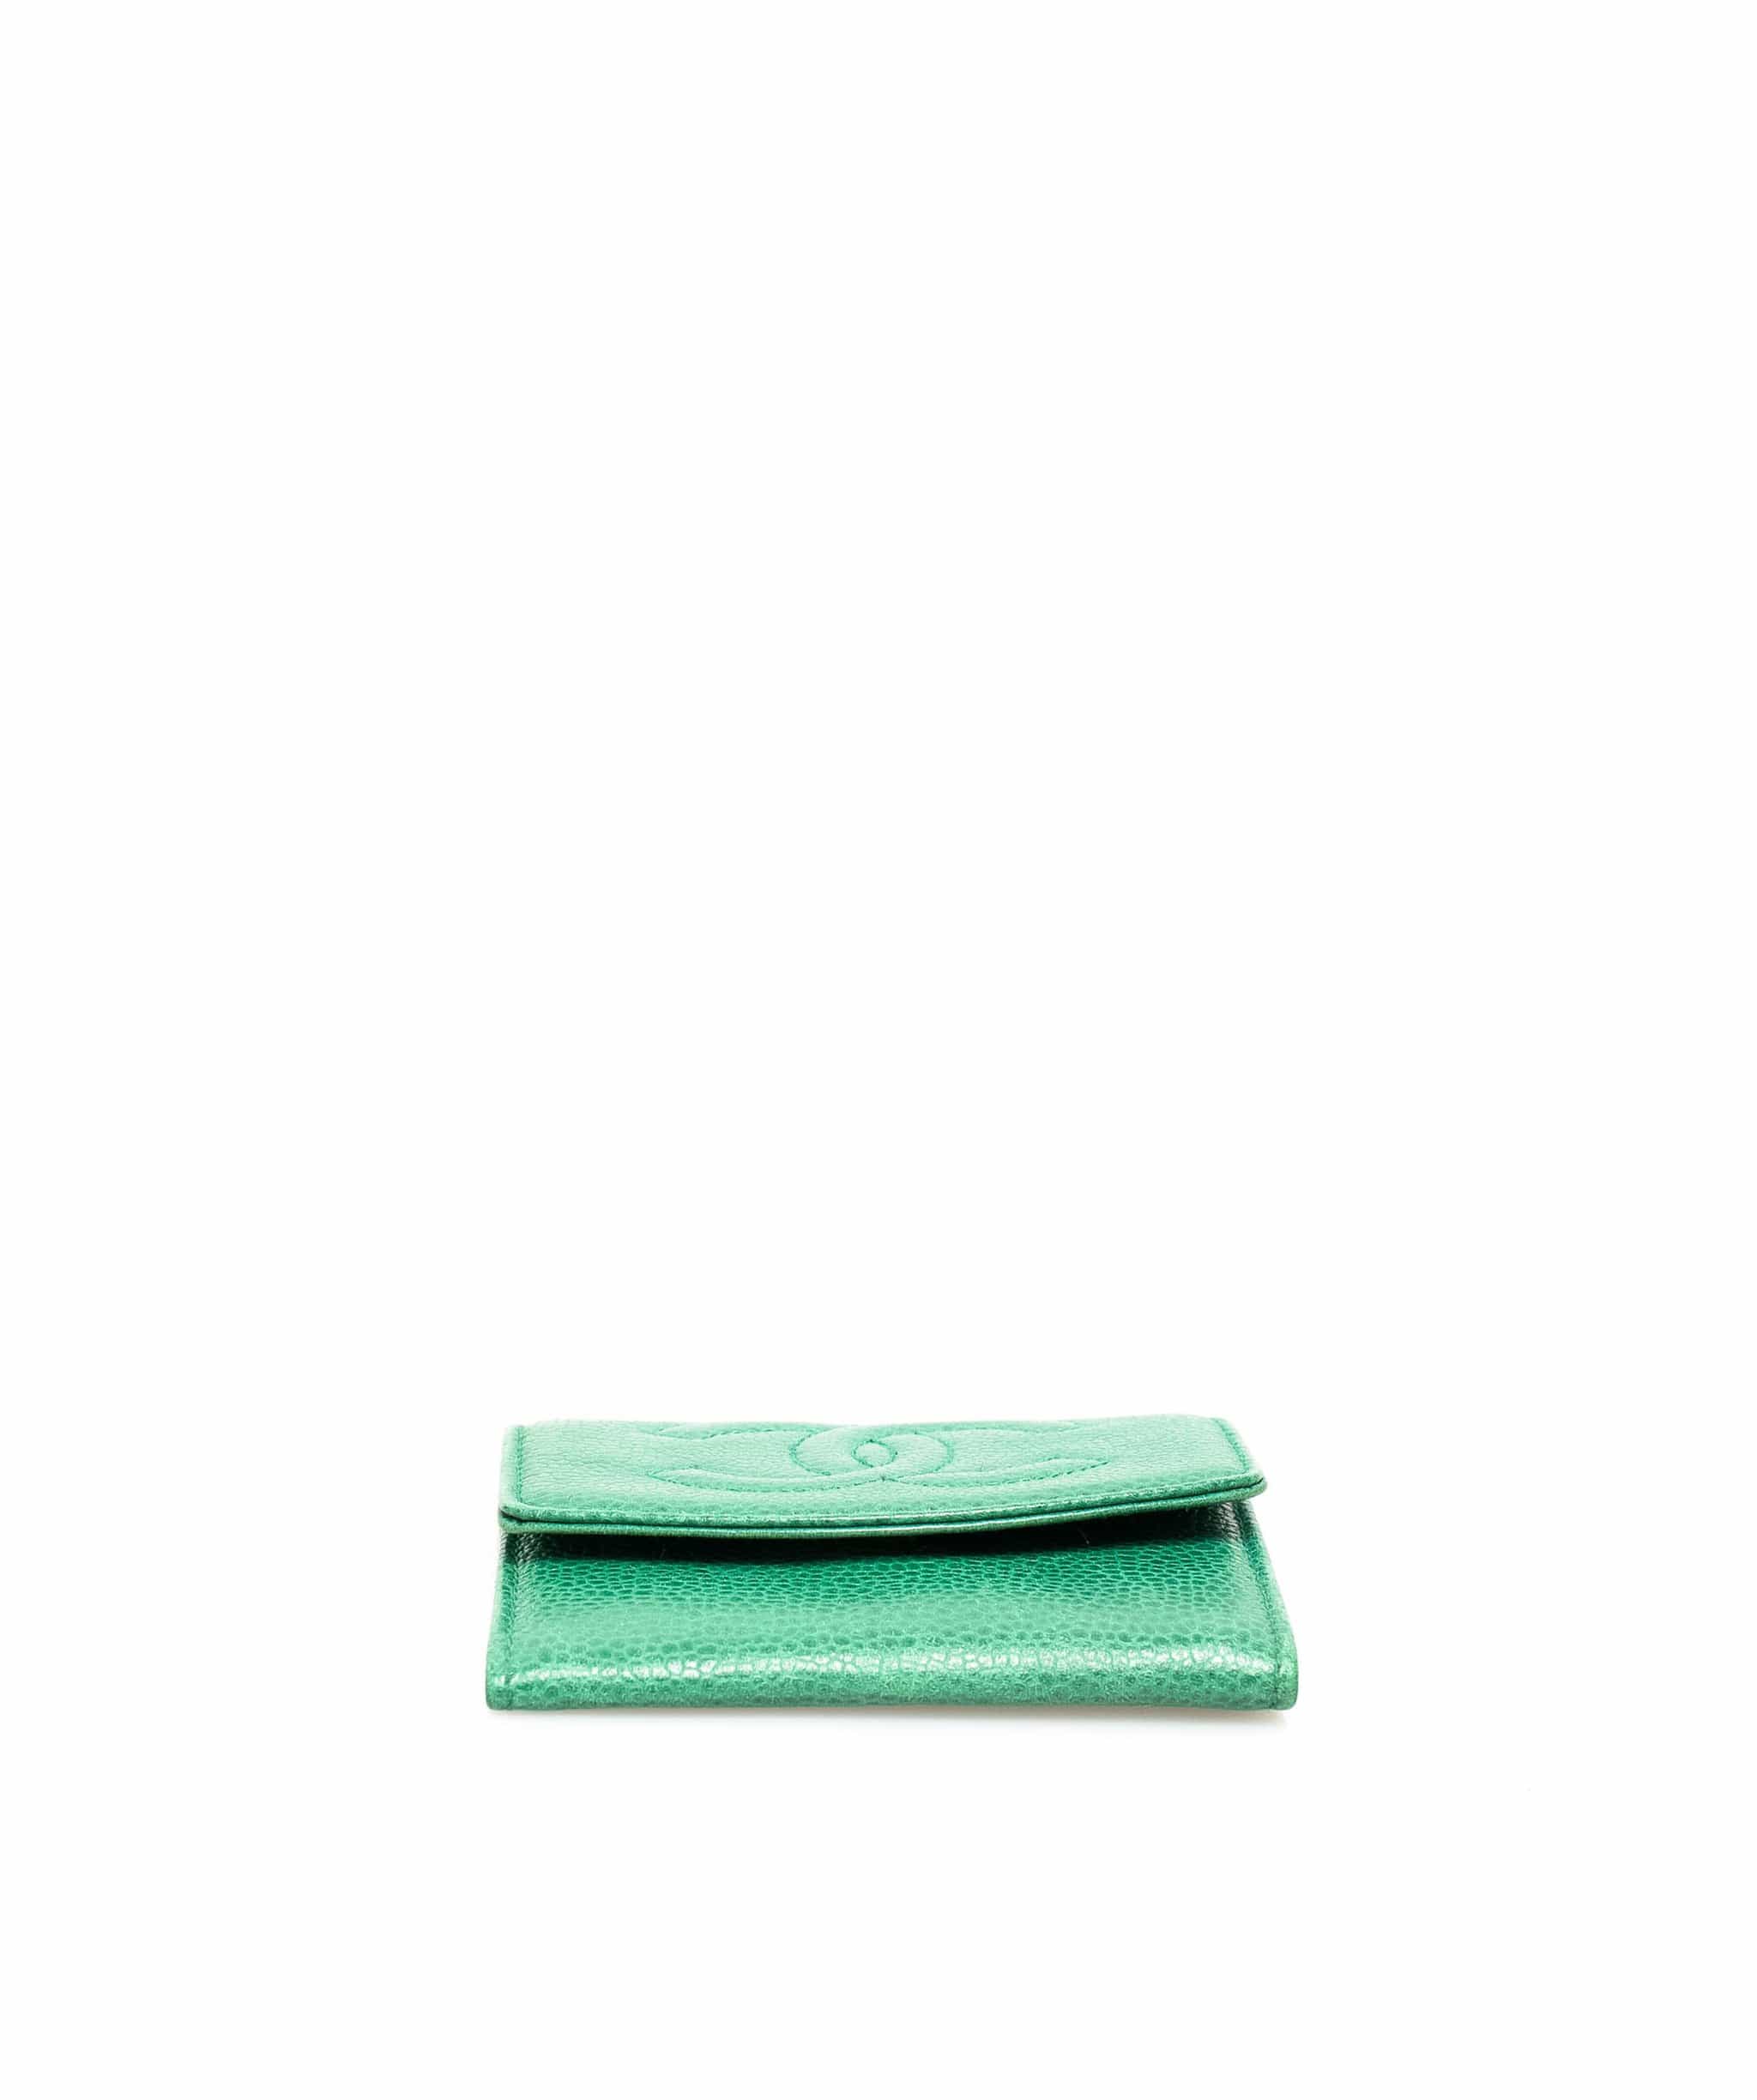 Chanel Chanel Vintage Green CC Caviar Leather Coin Pouch - AWL1899